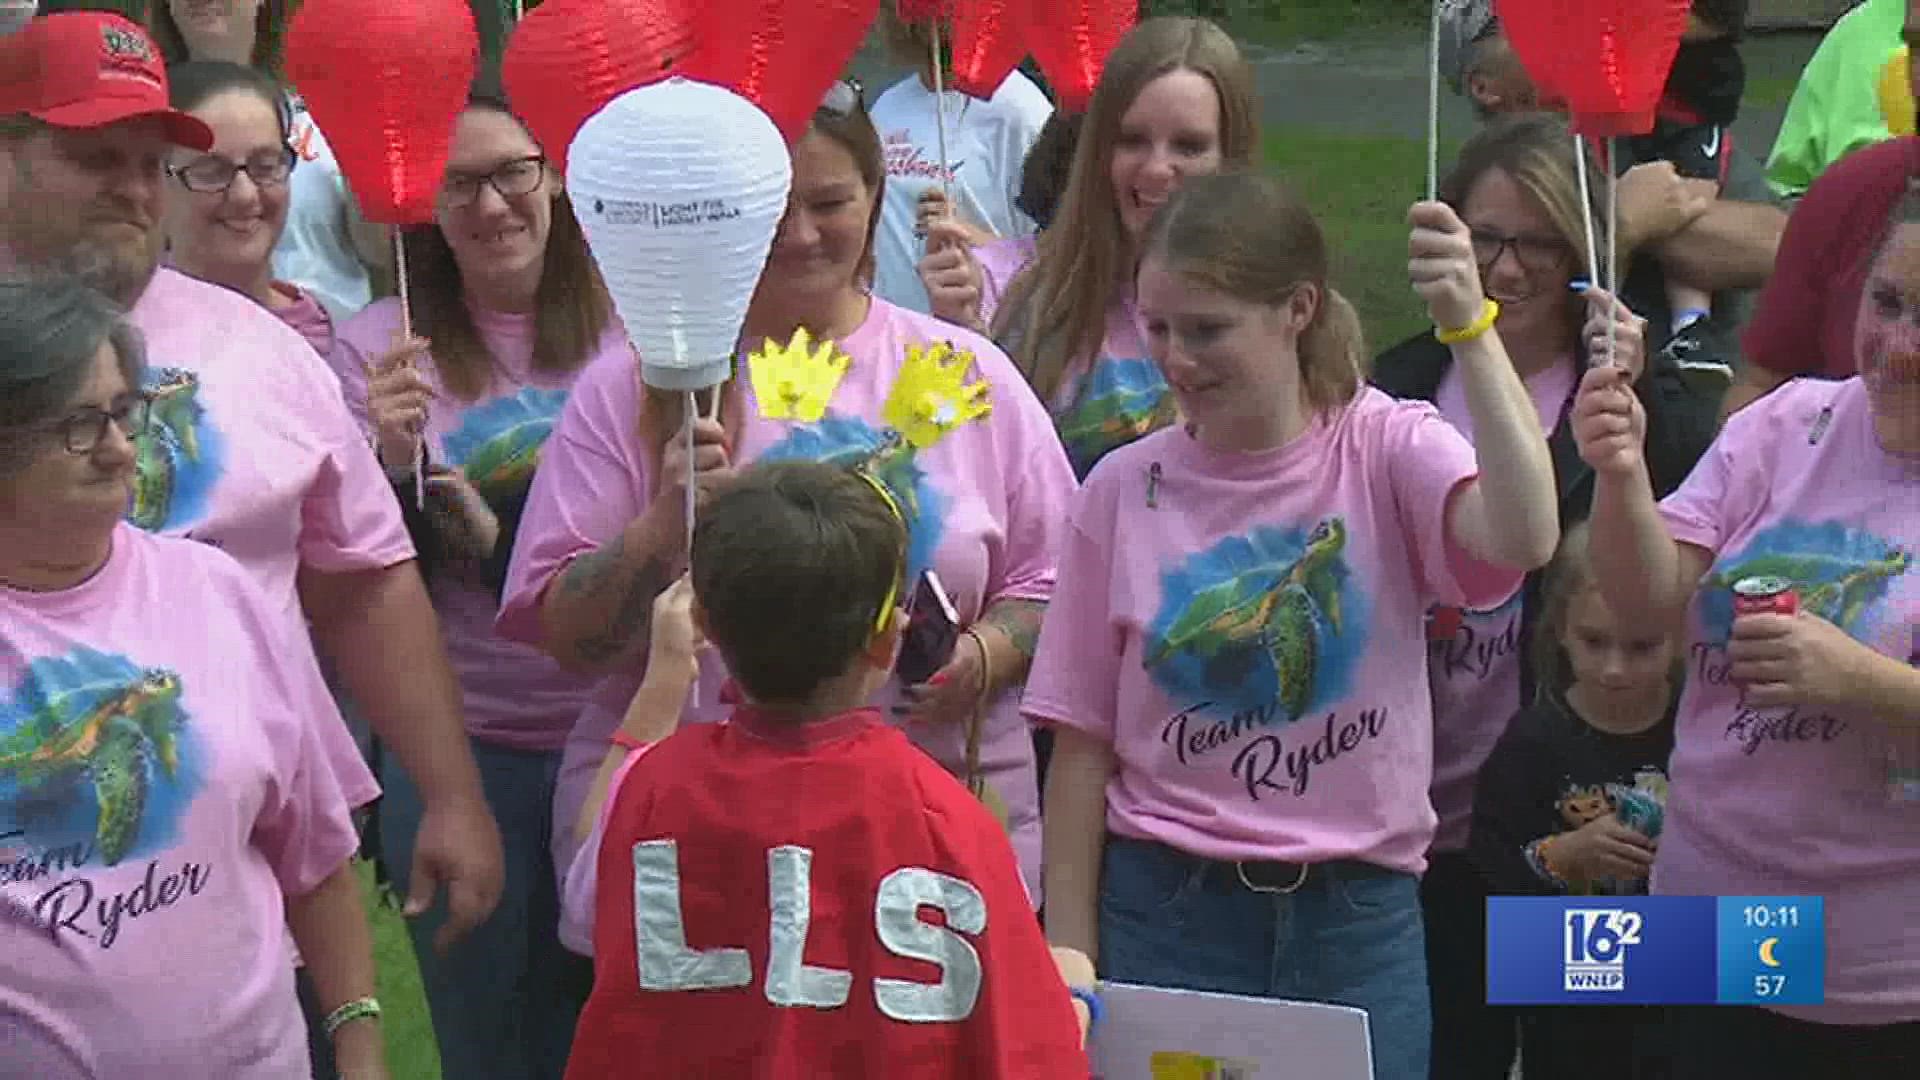 All of the money raised at Light the Night will benefit the Leukemia and Lymphoma Society.